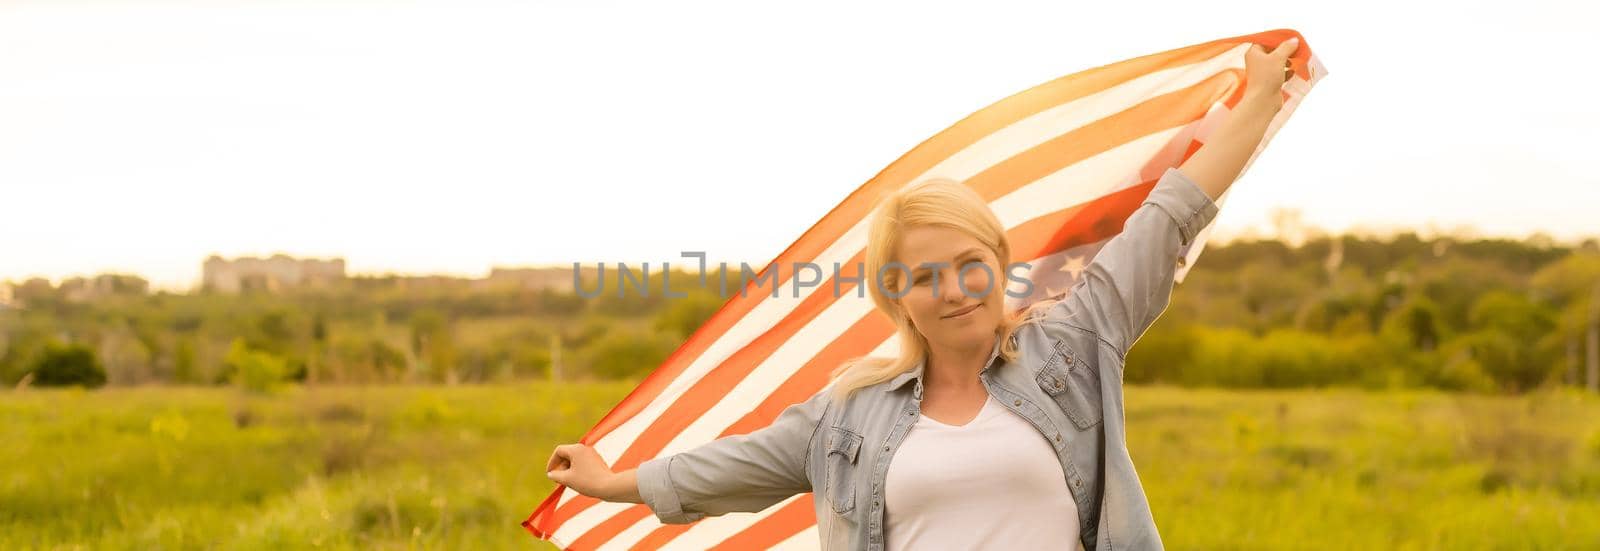 country, patriotism, independence day and people concept - happy smiling young woman with national american flag on field.